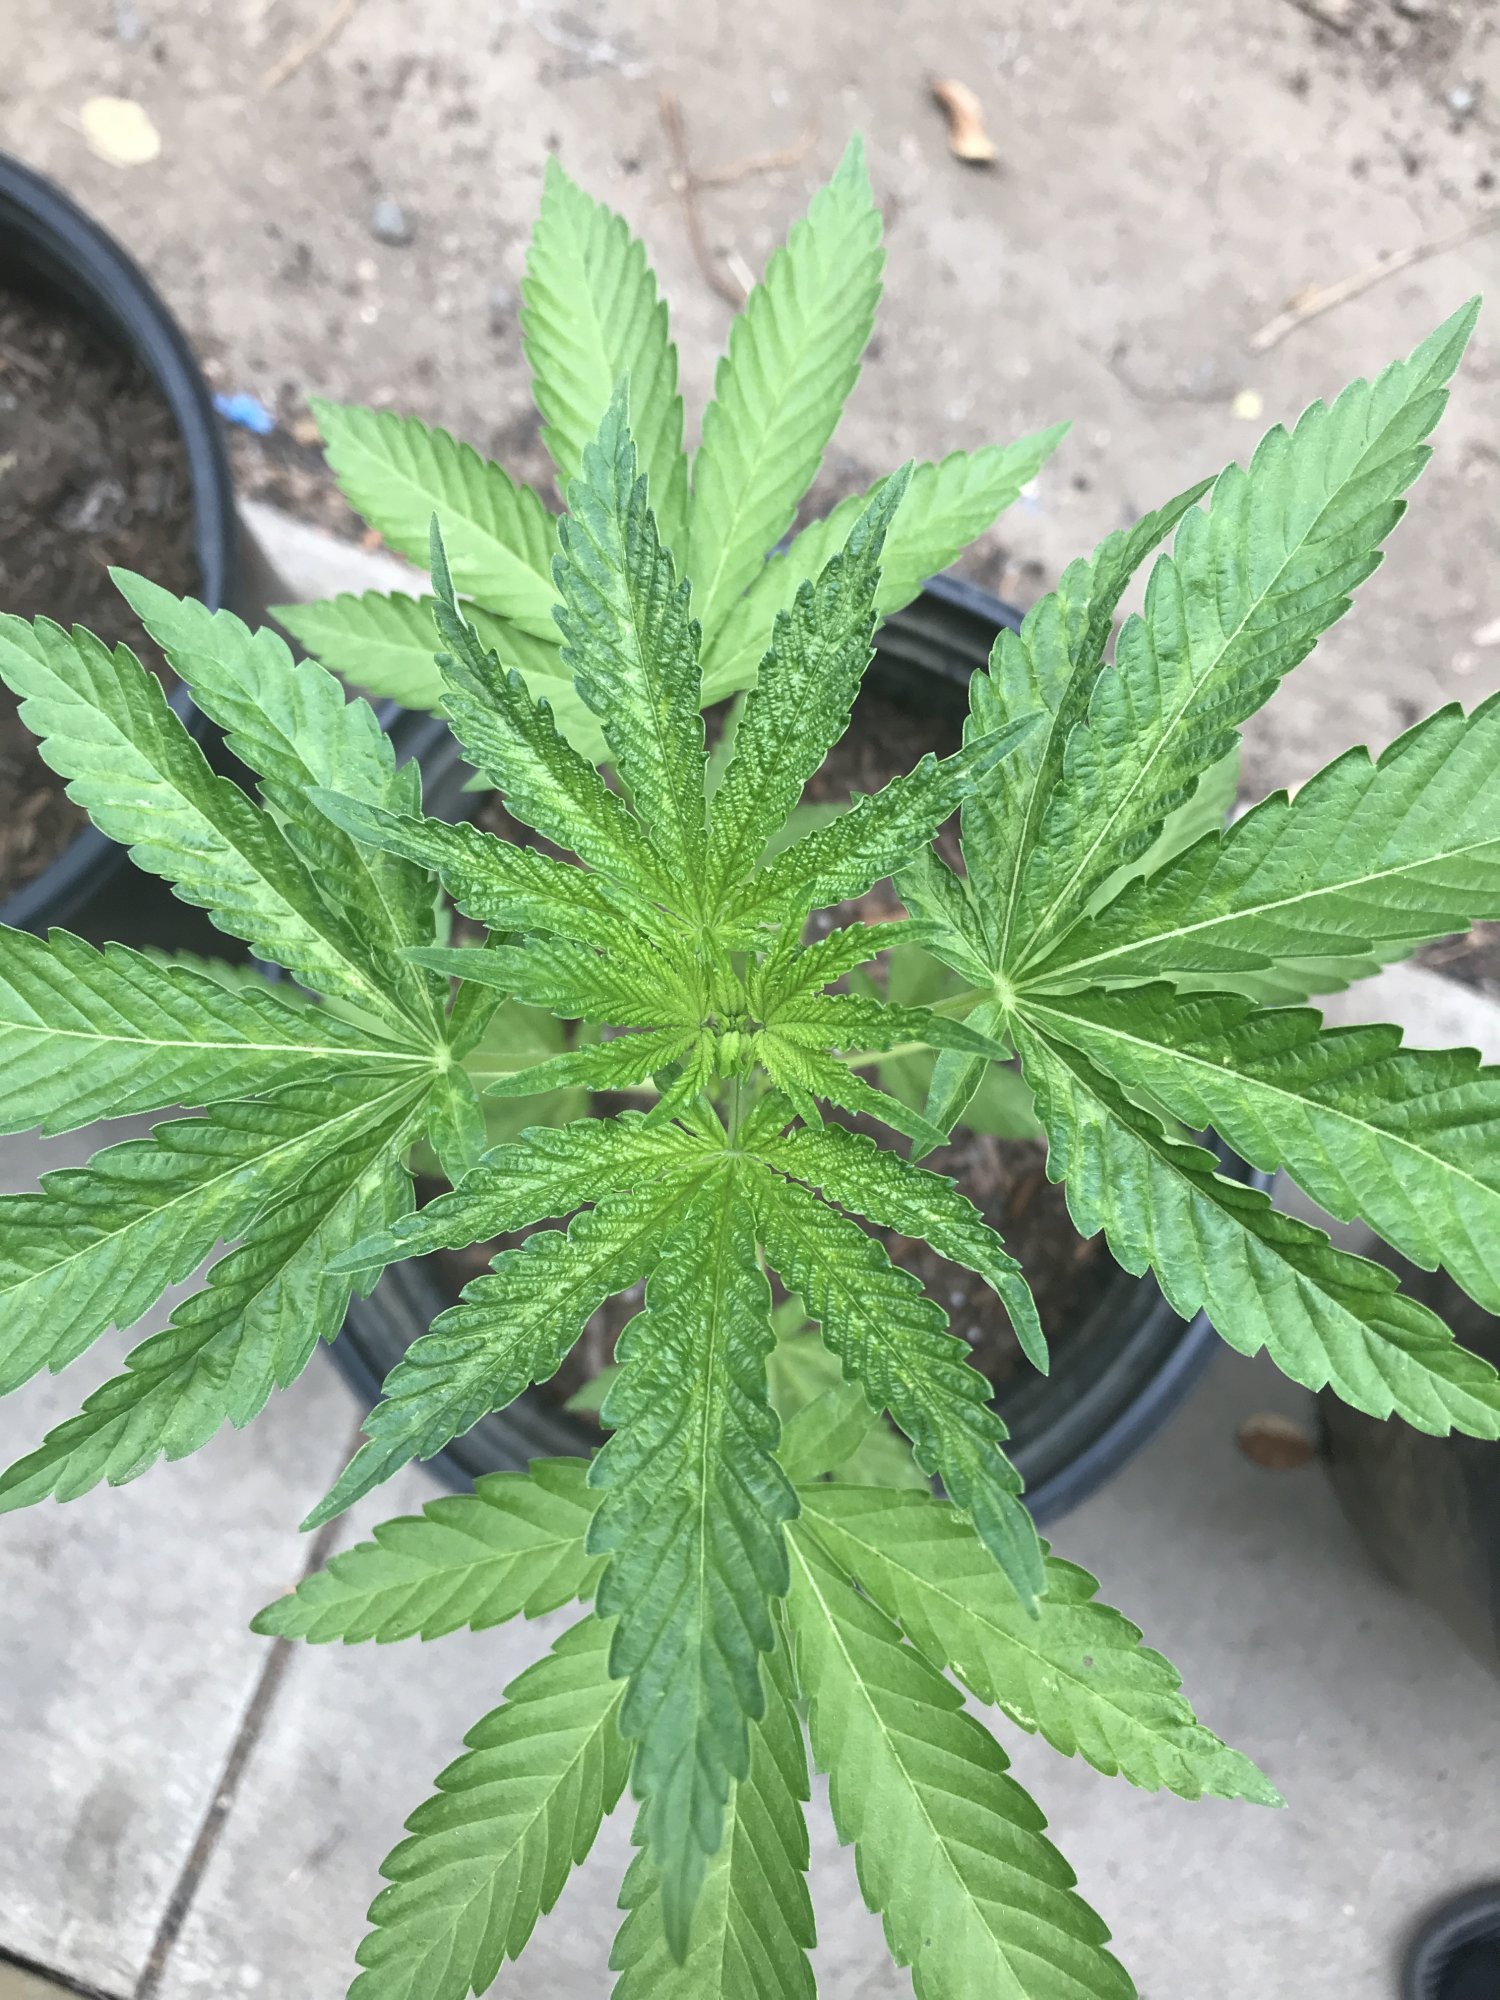 What wrong with my leaves